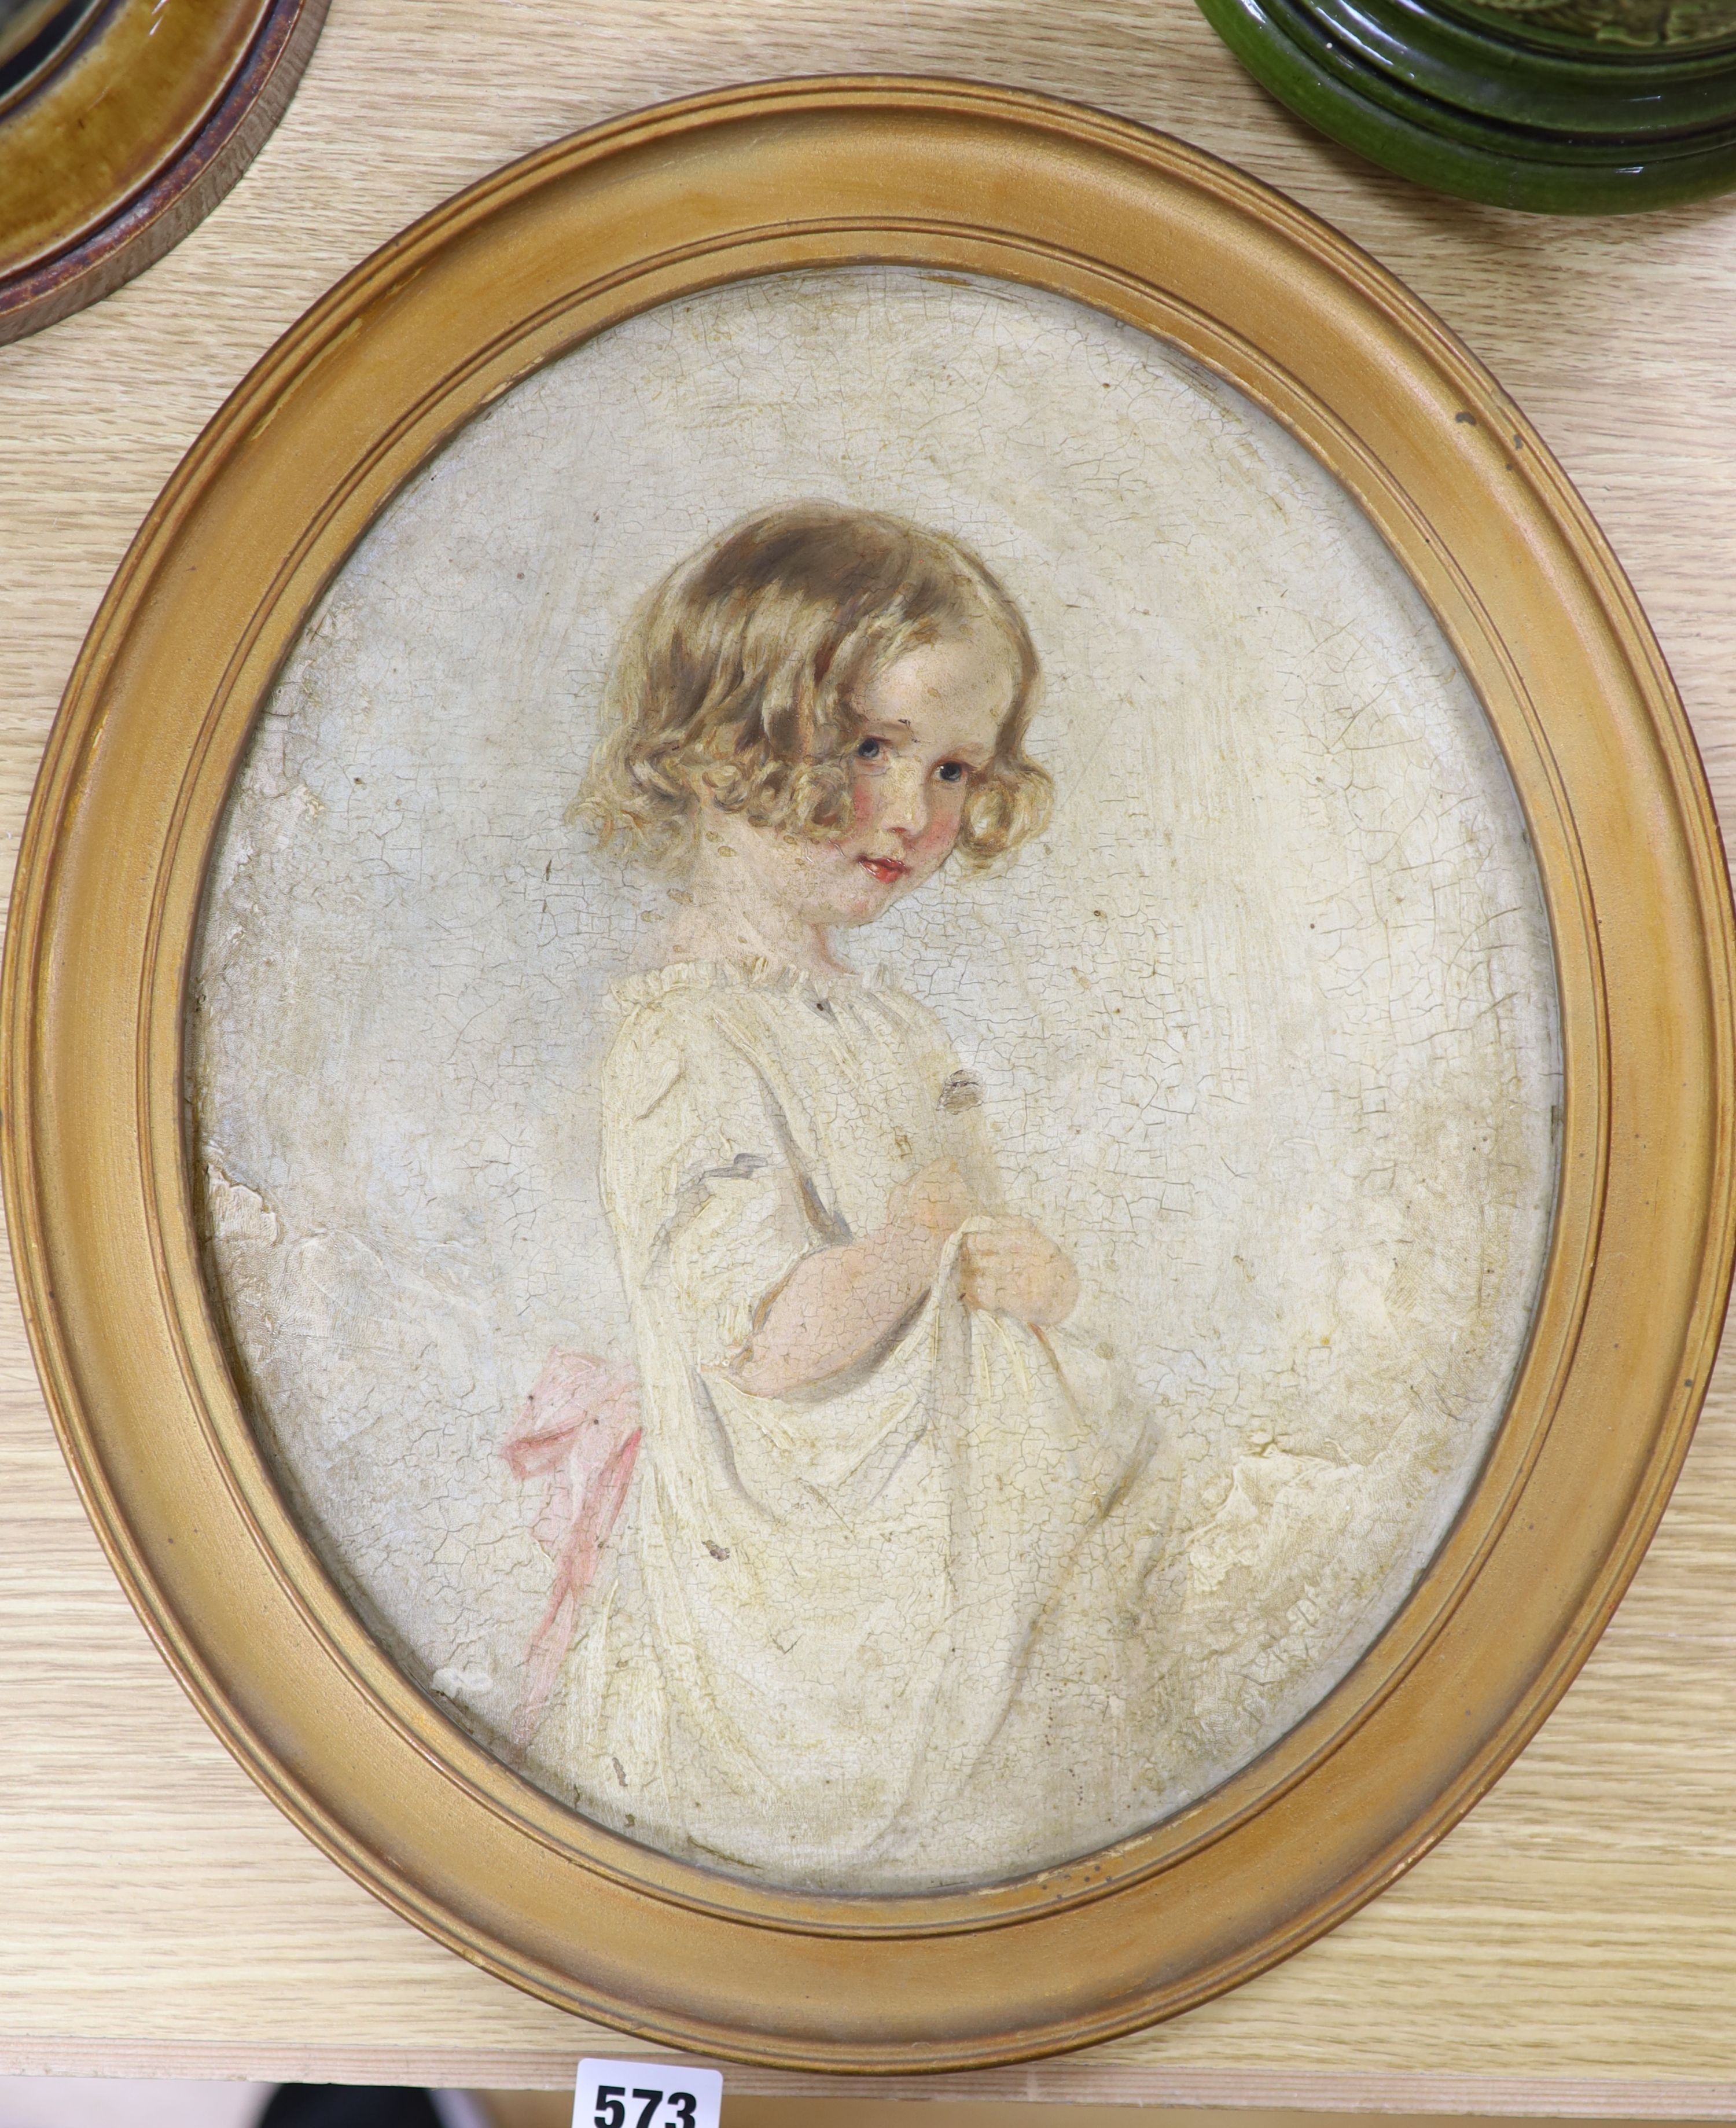 Early 20th century English School, oil on board, Portrait of a young girl, oval, 34 x 29cm